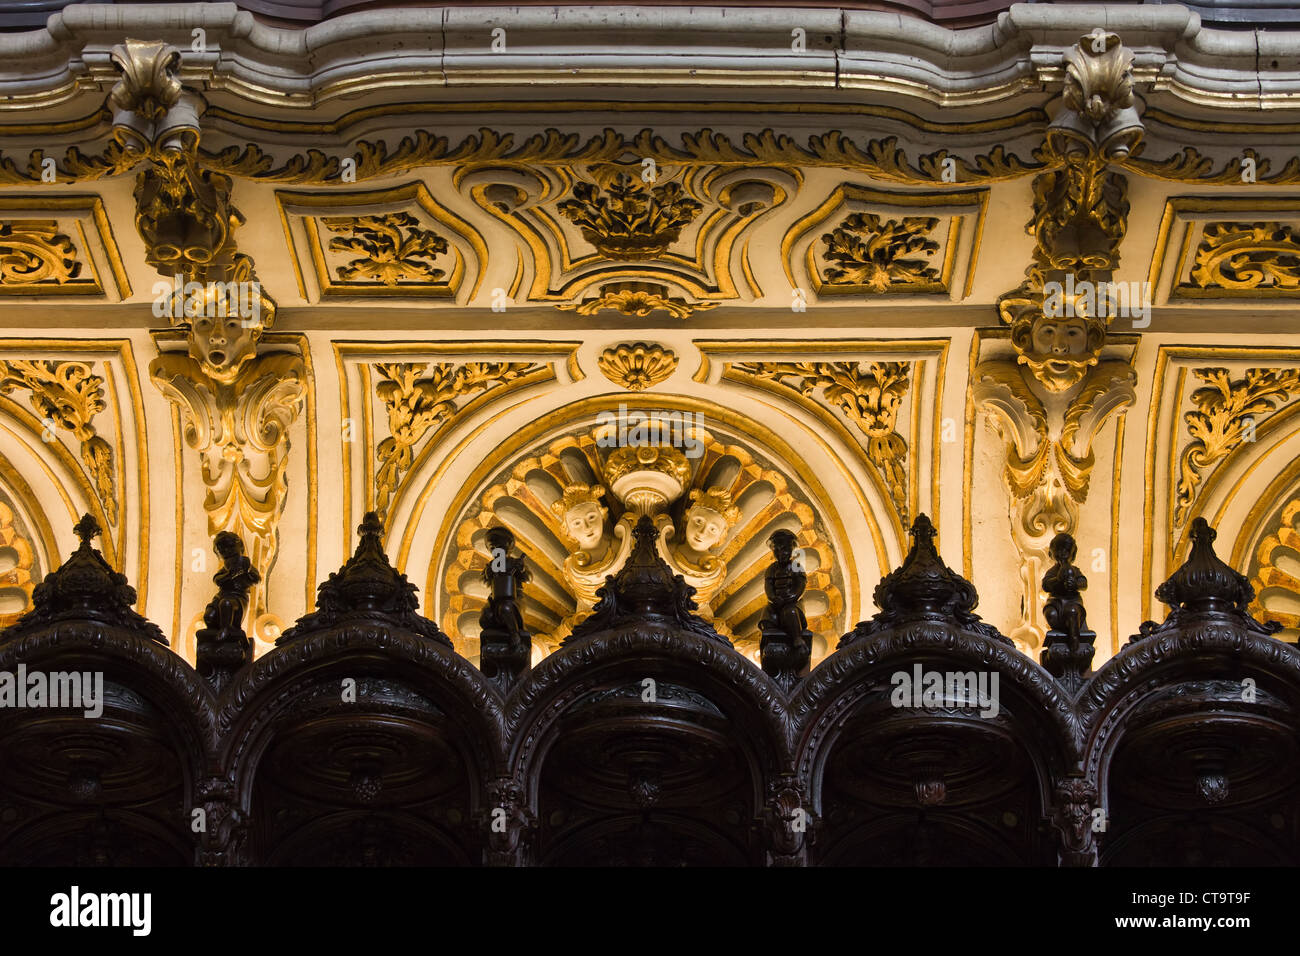 Close-up on the illuminated historic Mezquita Cathedral choir stalls details in Cordoba, Spain. Stock Photo